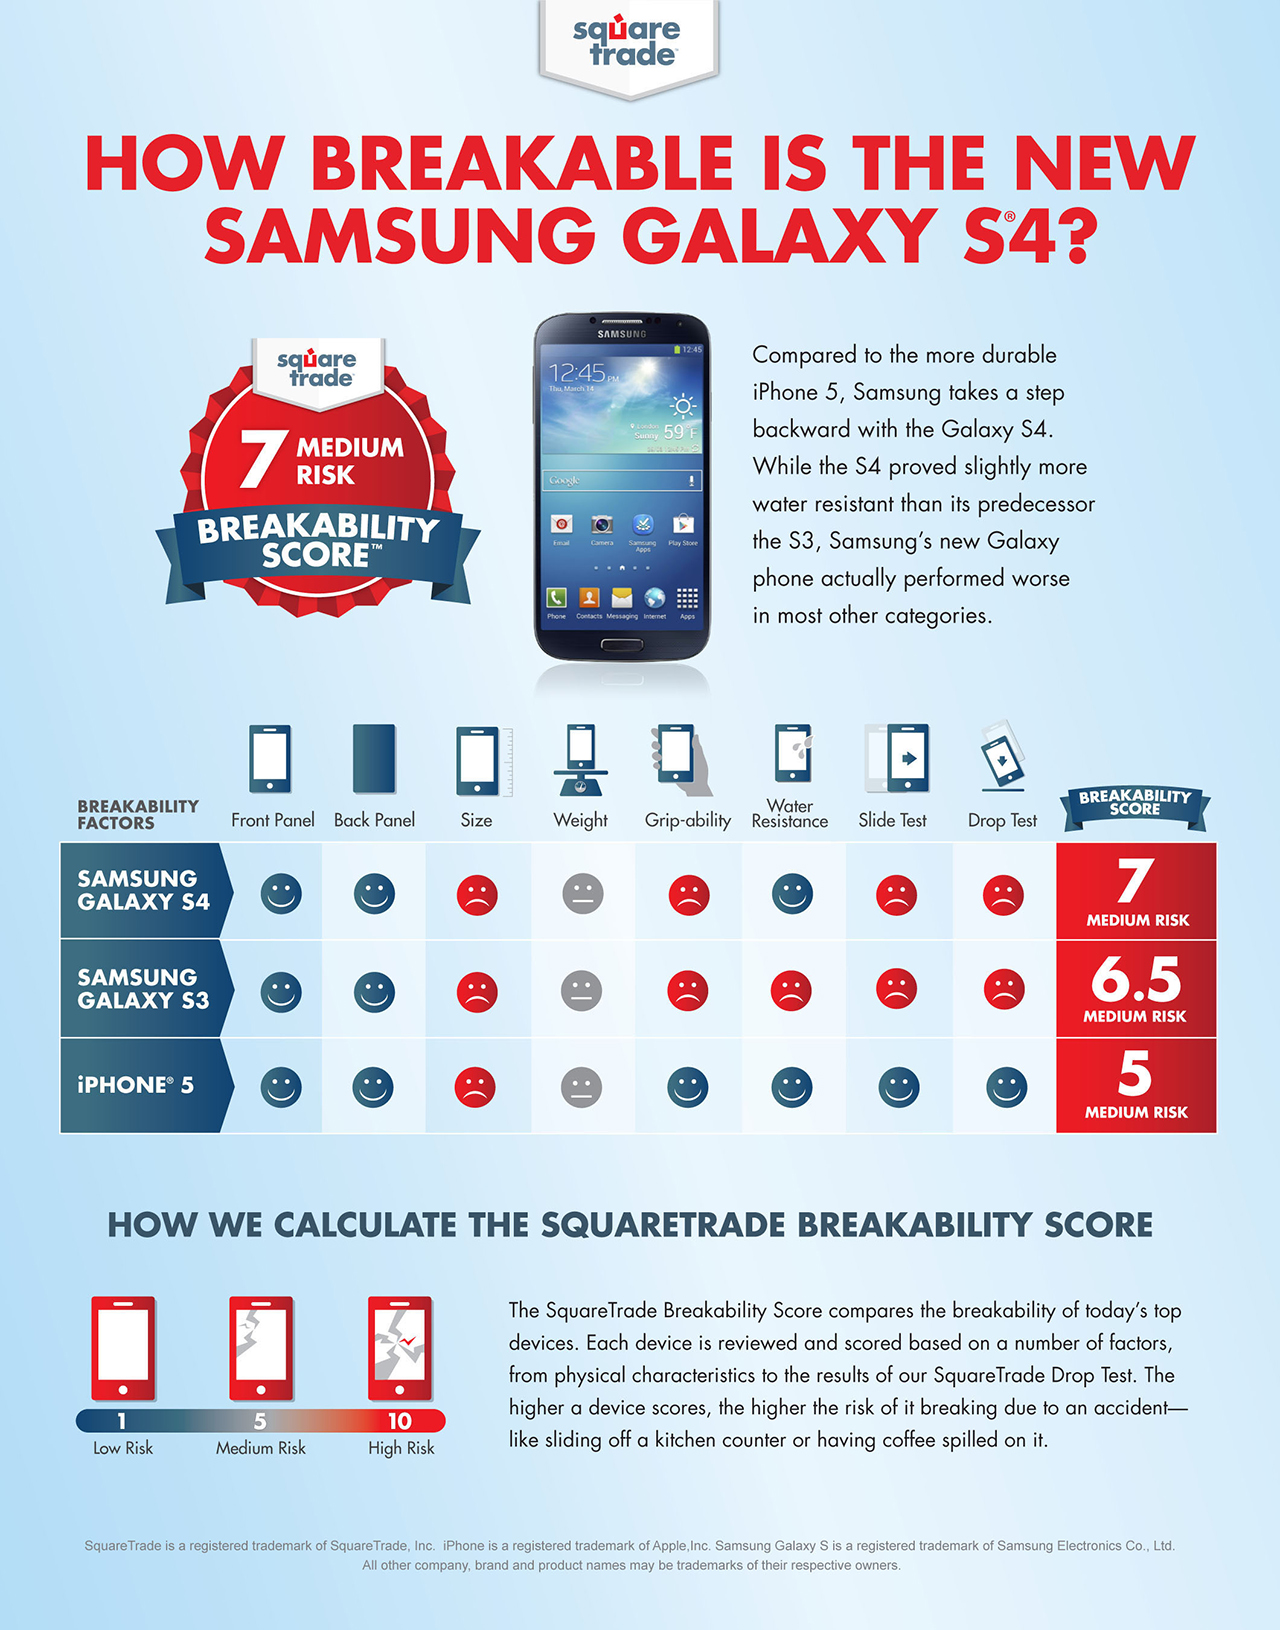 SquareTrade Finds Samsung Galaxy S4 is More Breakable Than iPhone 5 [Infographic]